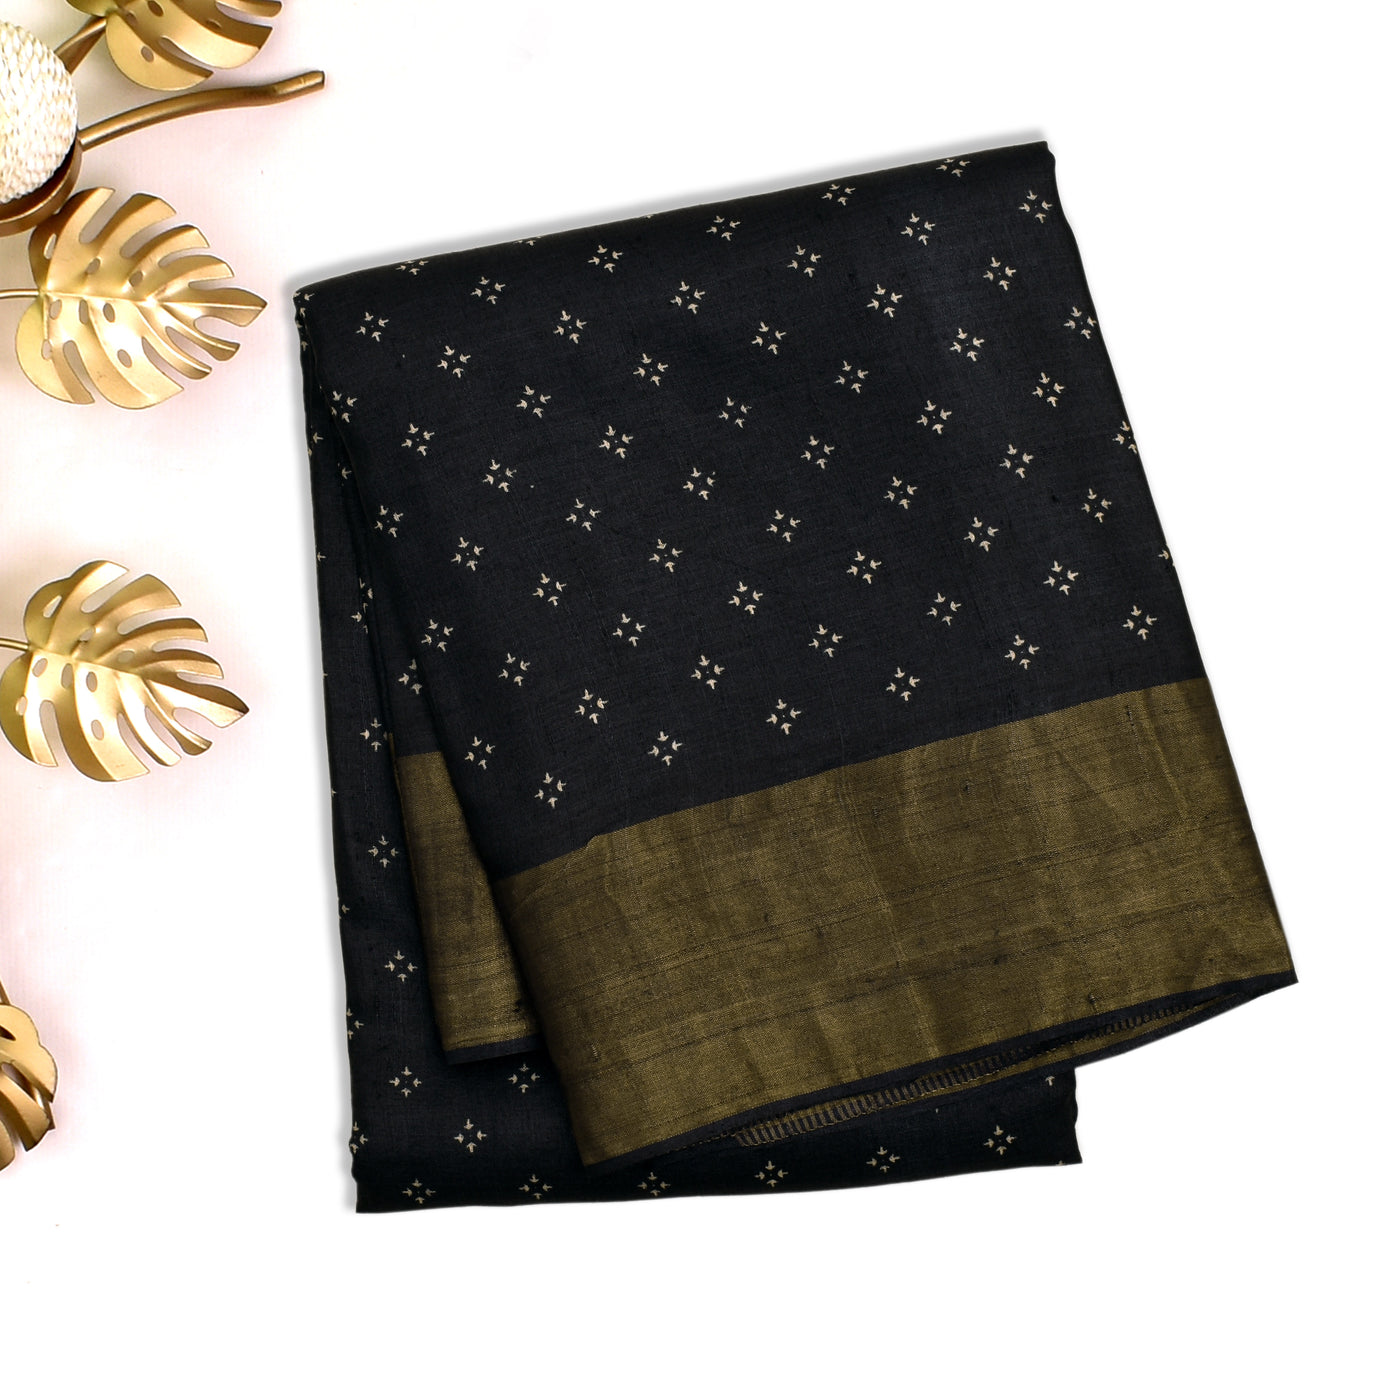 https://anyaonline.in/products/black-tussar-silk-saree-with-small-printed-design